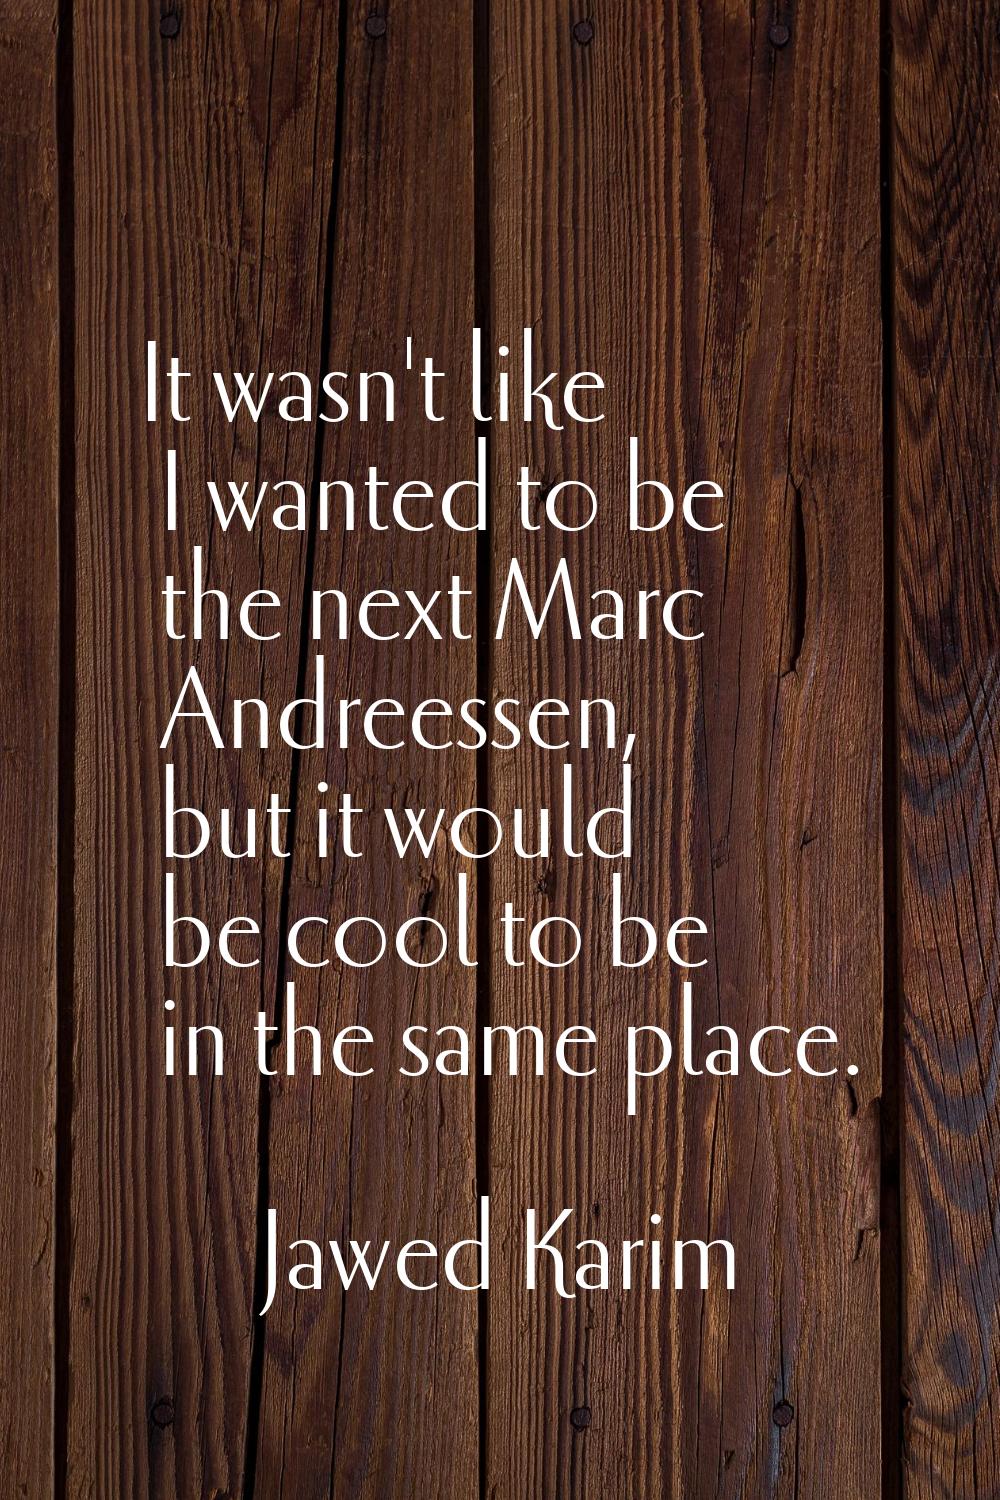 It wasn't like I wanted to be the next Marc Andreessen, but it would be cool to be in the same plac